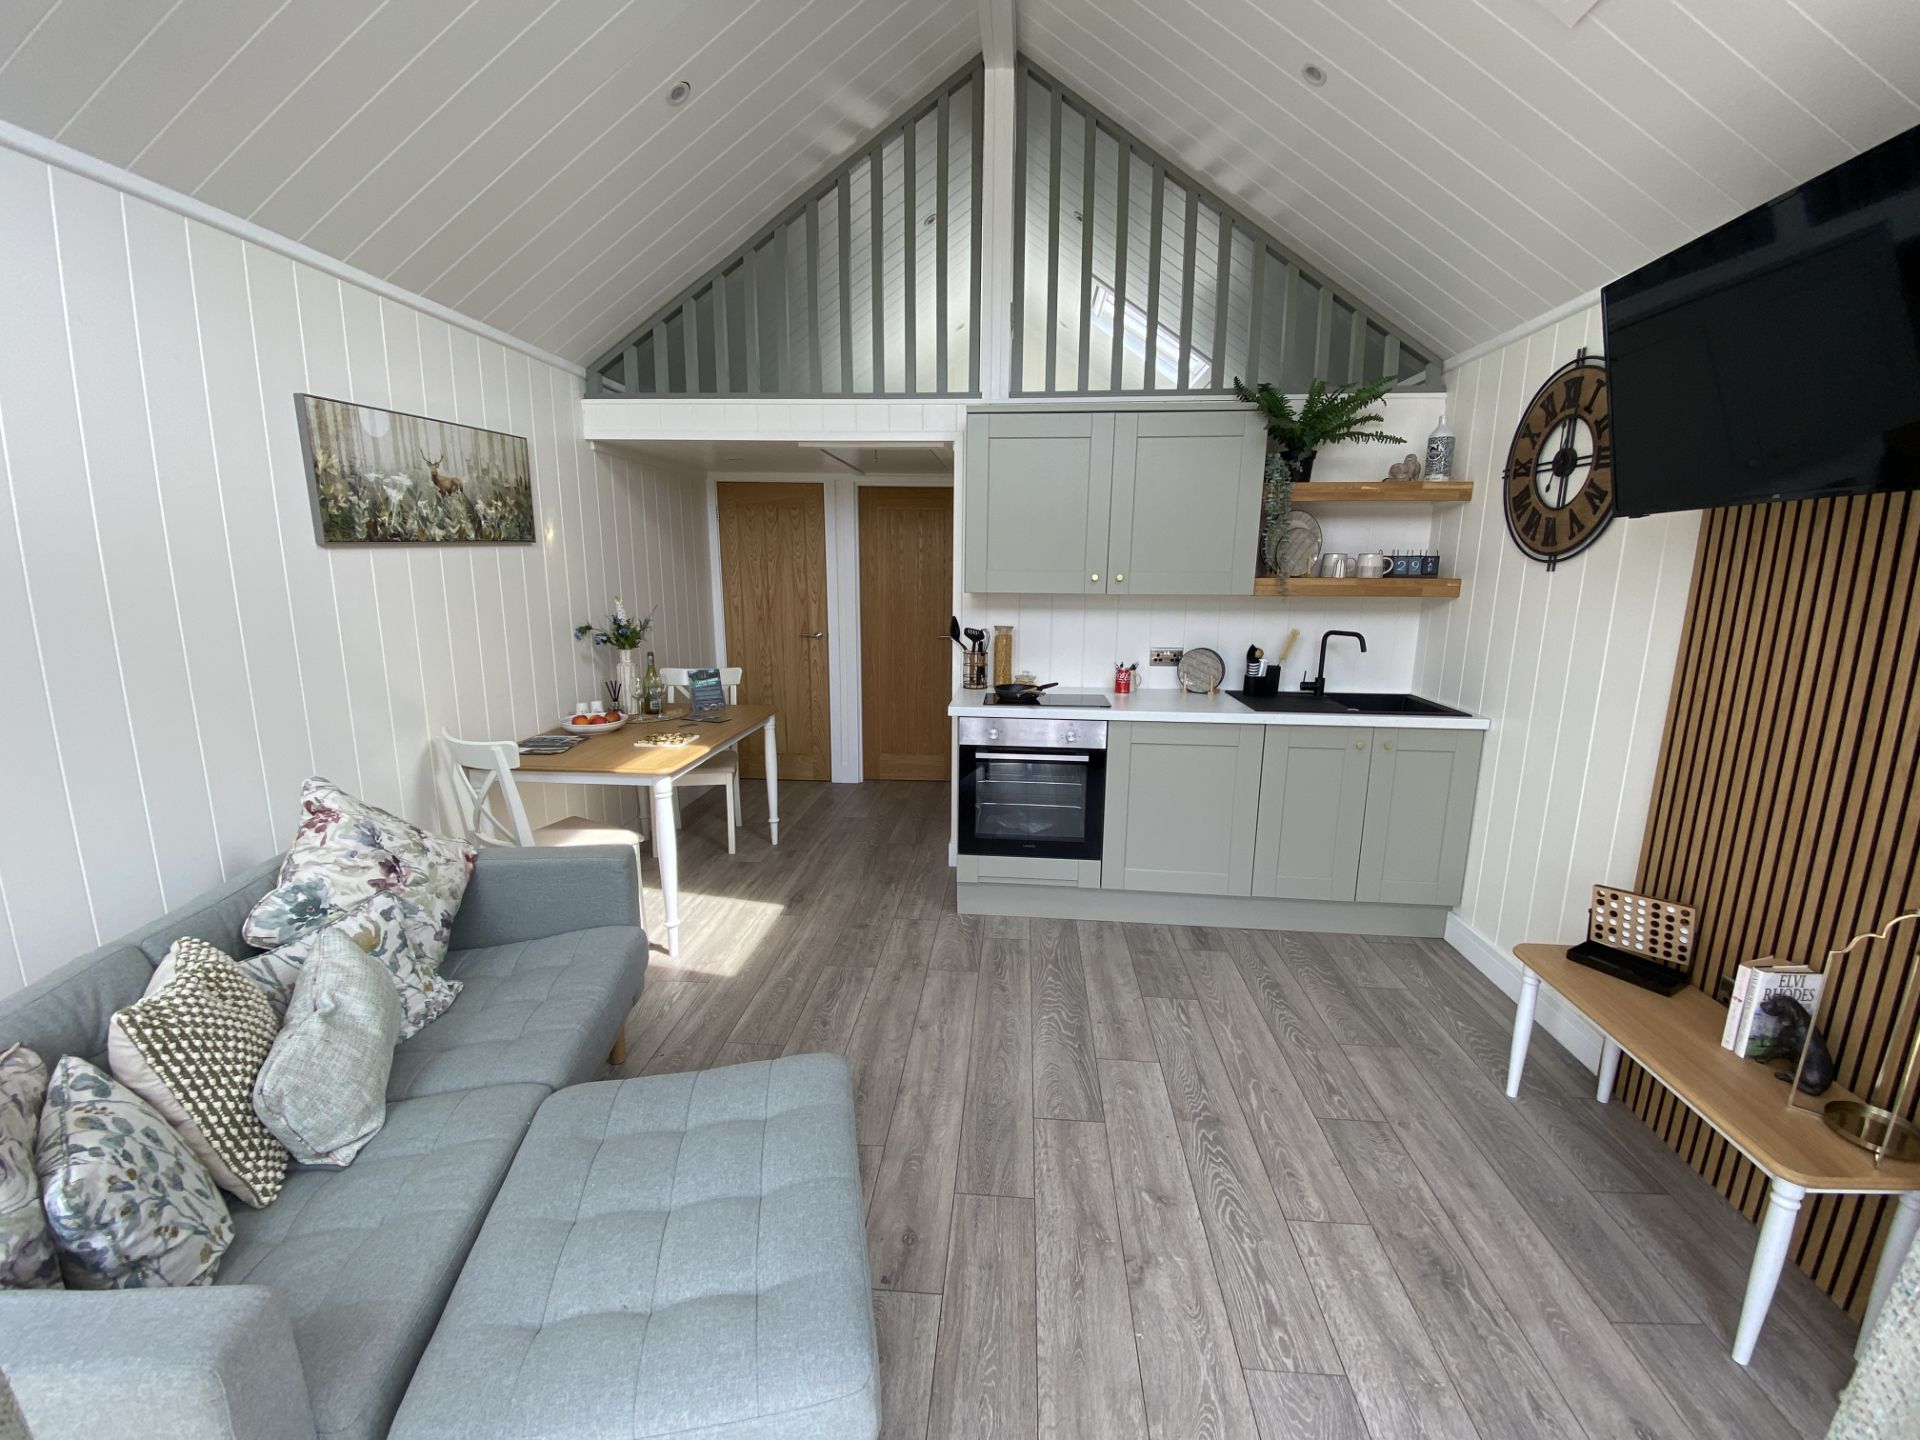 BAILEY CAMPING POD (2 storey 8m x 4m approx) Open Plan Layout Comprising Kitchen/Diner, 2 Bedrooms, - Image 7 of 54